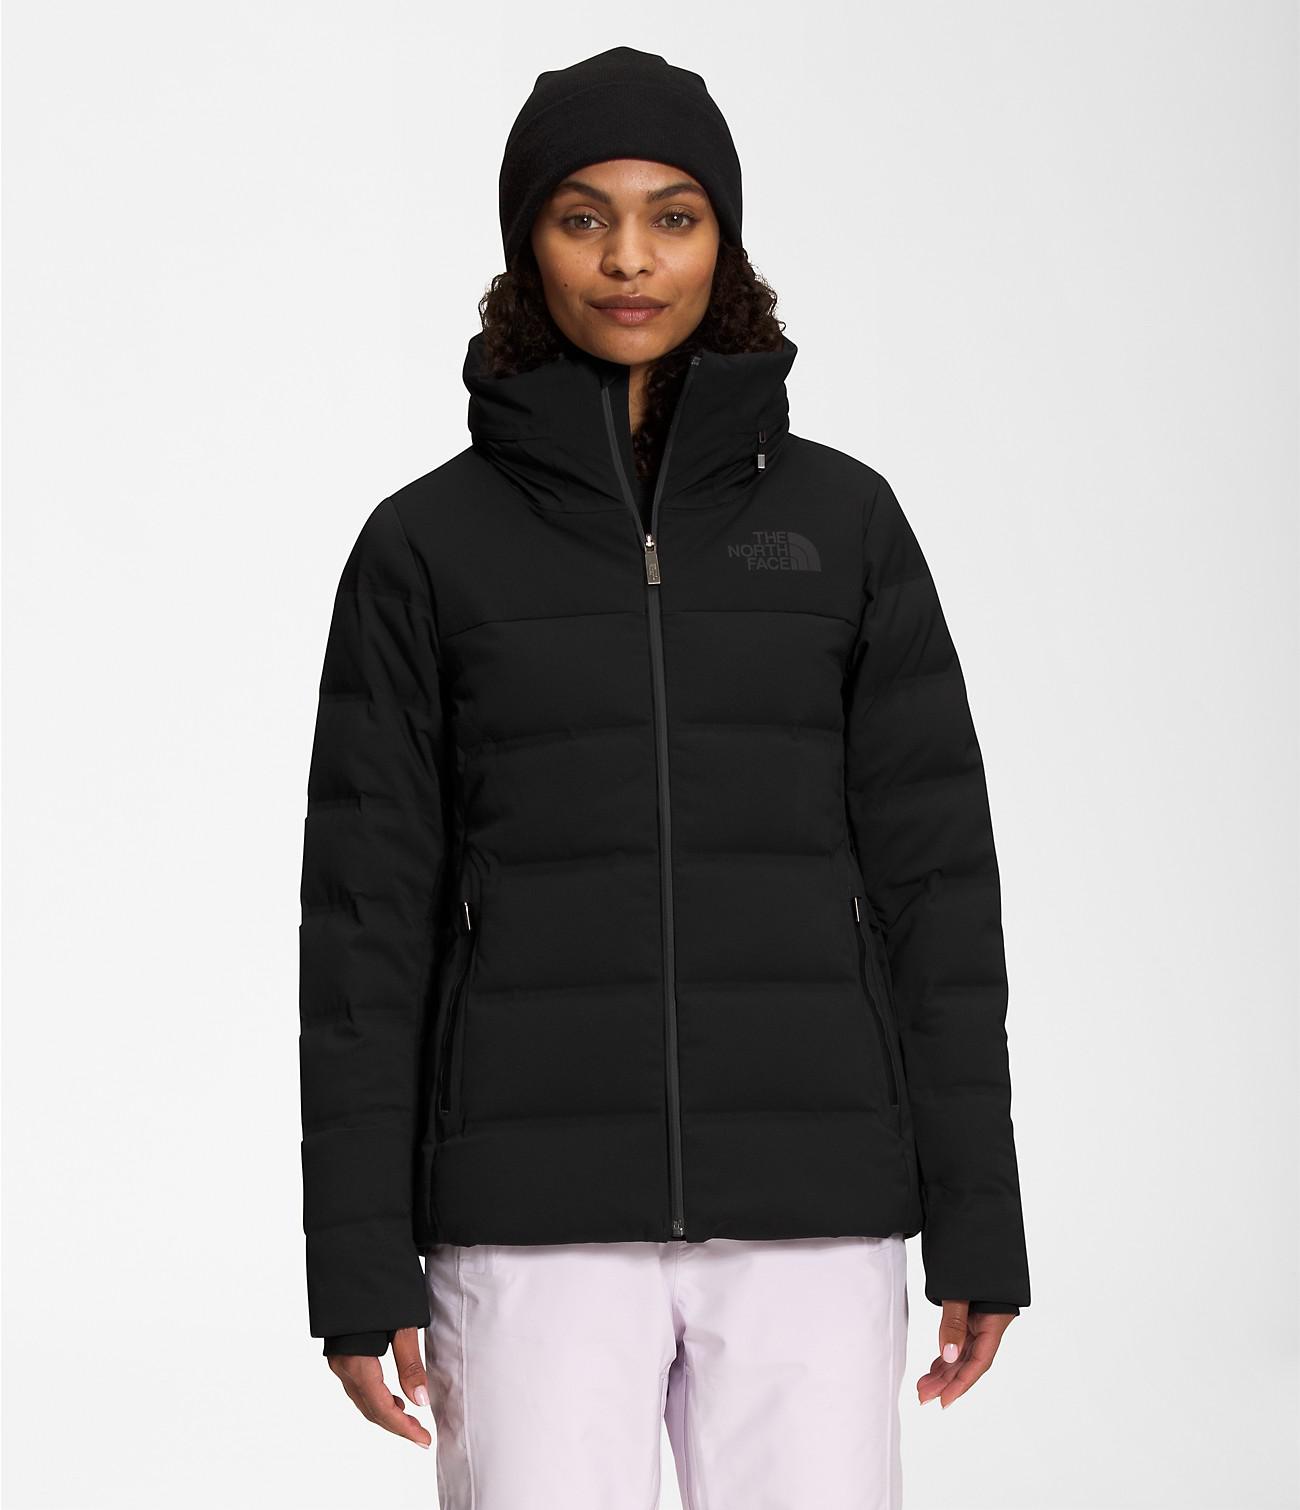 Women’s Summit Series Torre Egger FUTURELIGHT™ Jacket by THE NORTH FACE ...